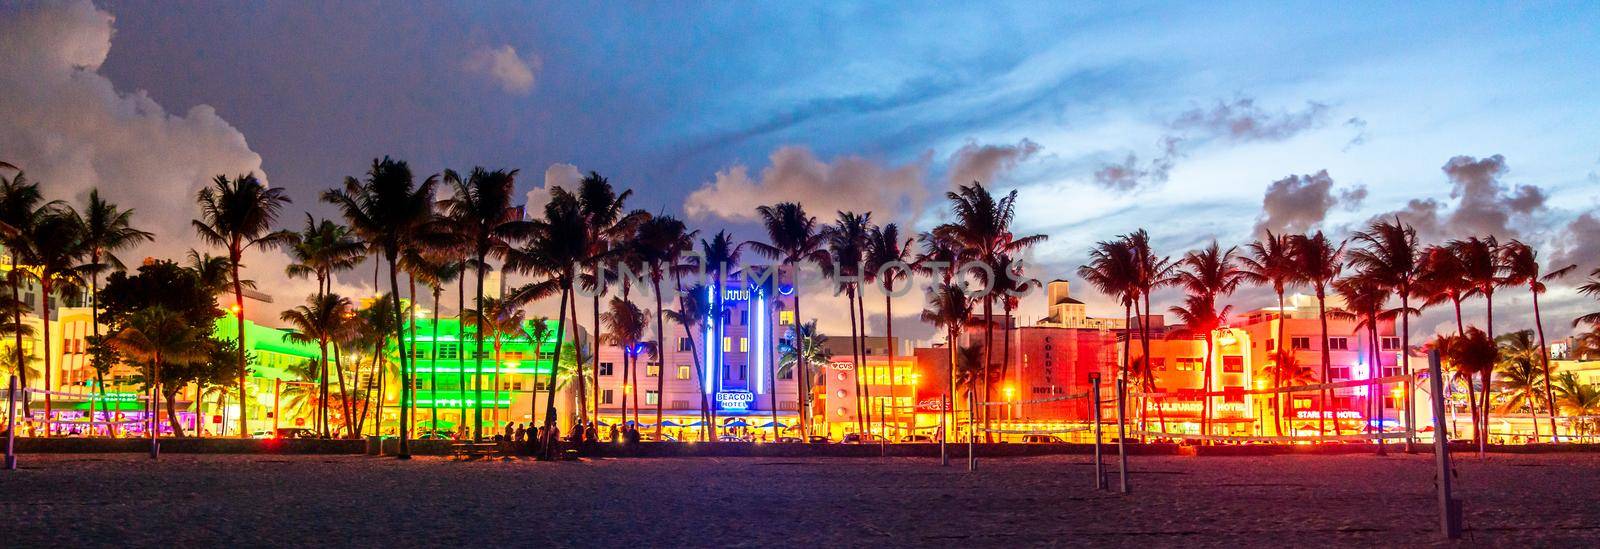 Miami Beach, USA - September 10, 2019: Panorama of Ocean Drive hotels and restaurants at sunset. City skyline with palm trees at night. Art deco nightlife on South beach by Mariakray